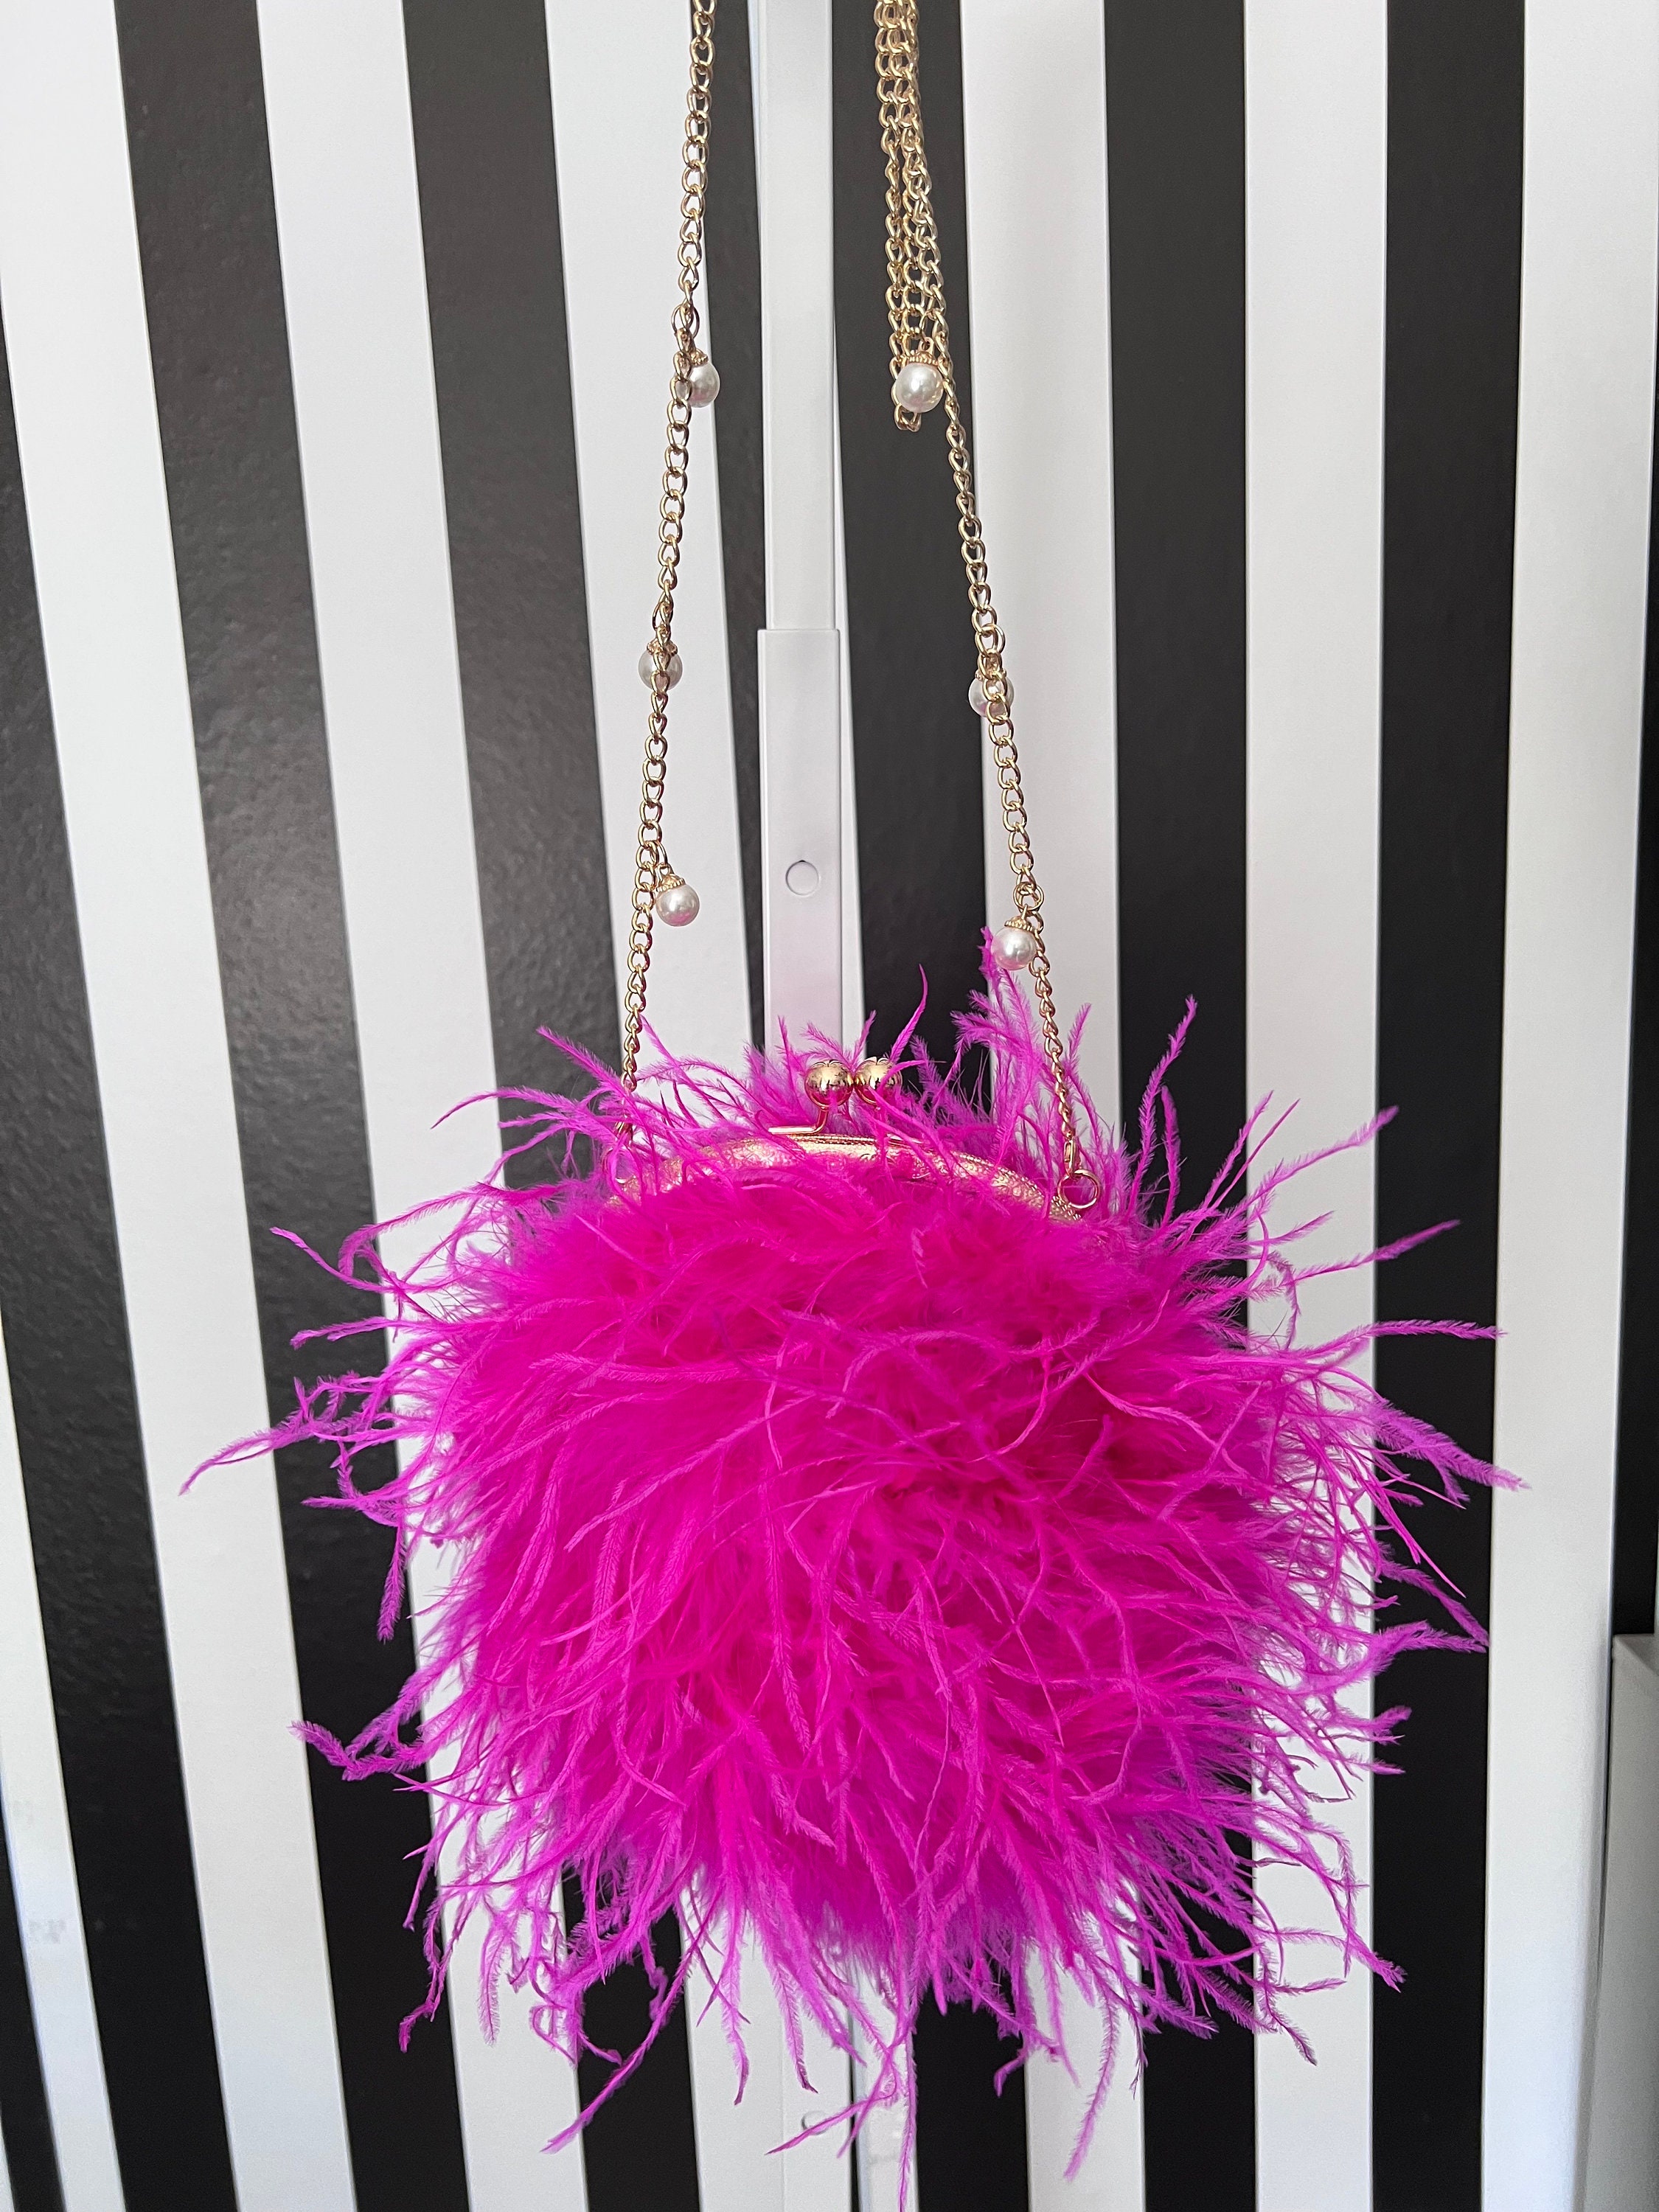 PEACHY PINK OSTRICH FEATHER BAG